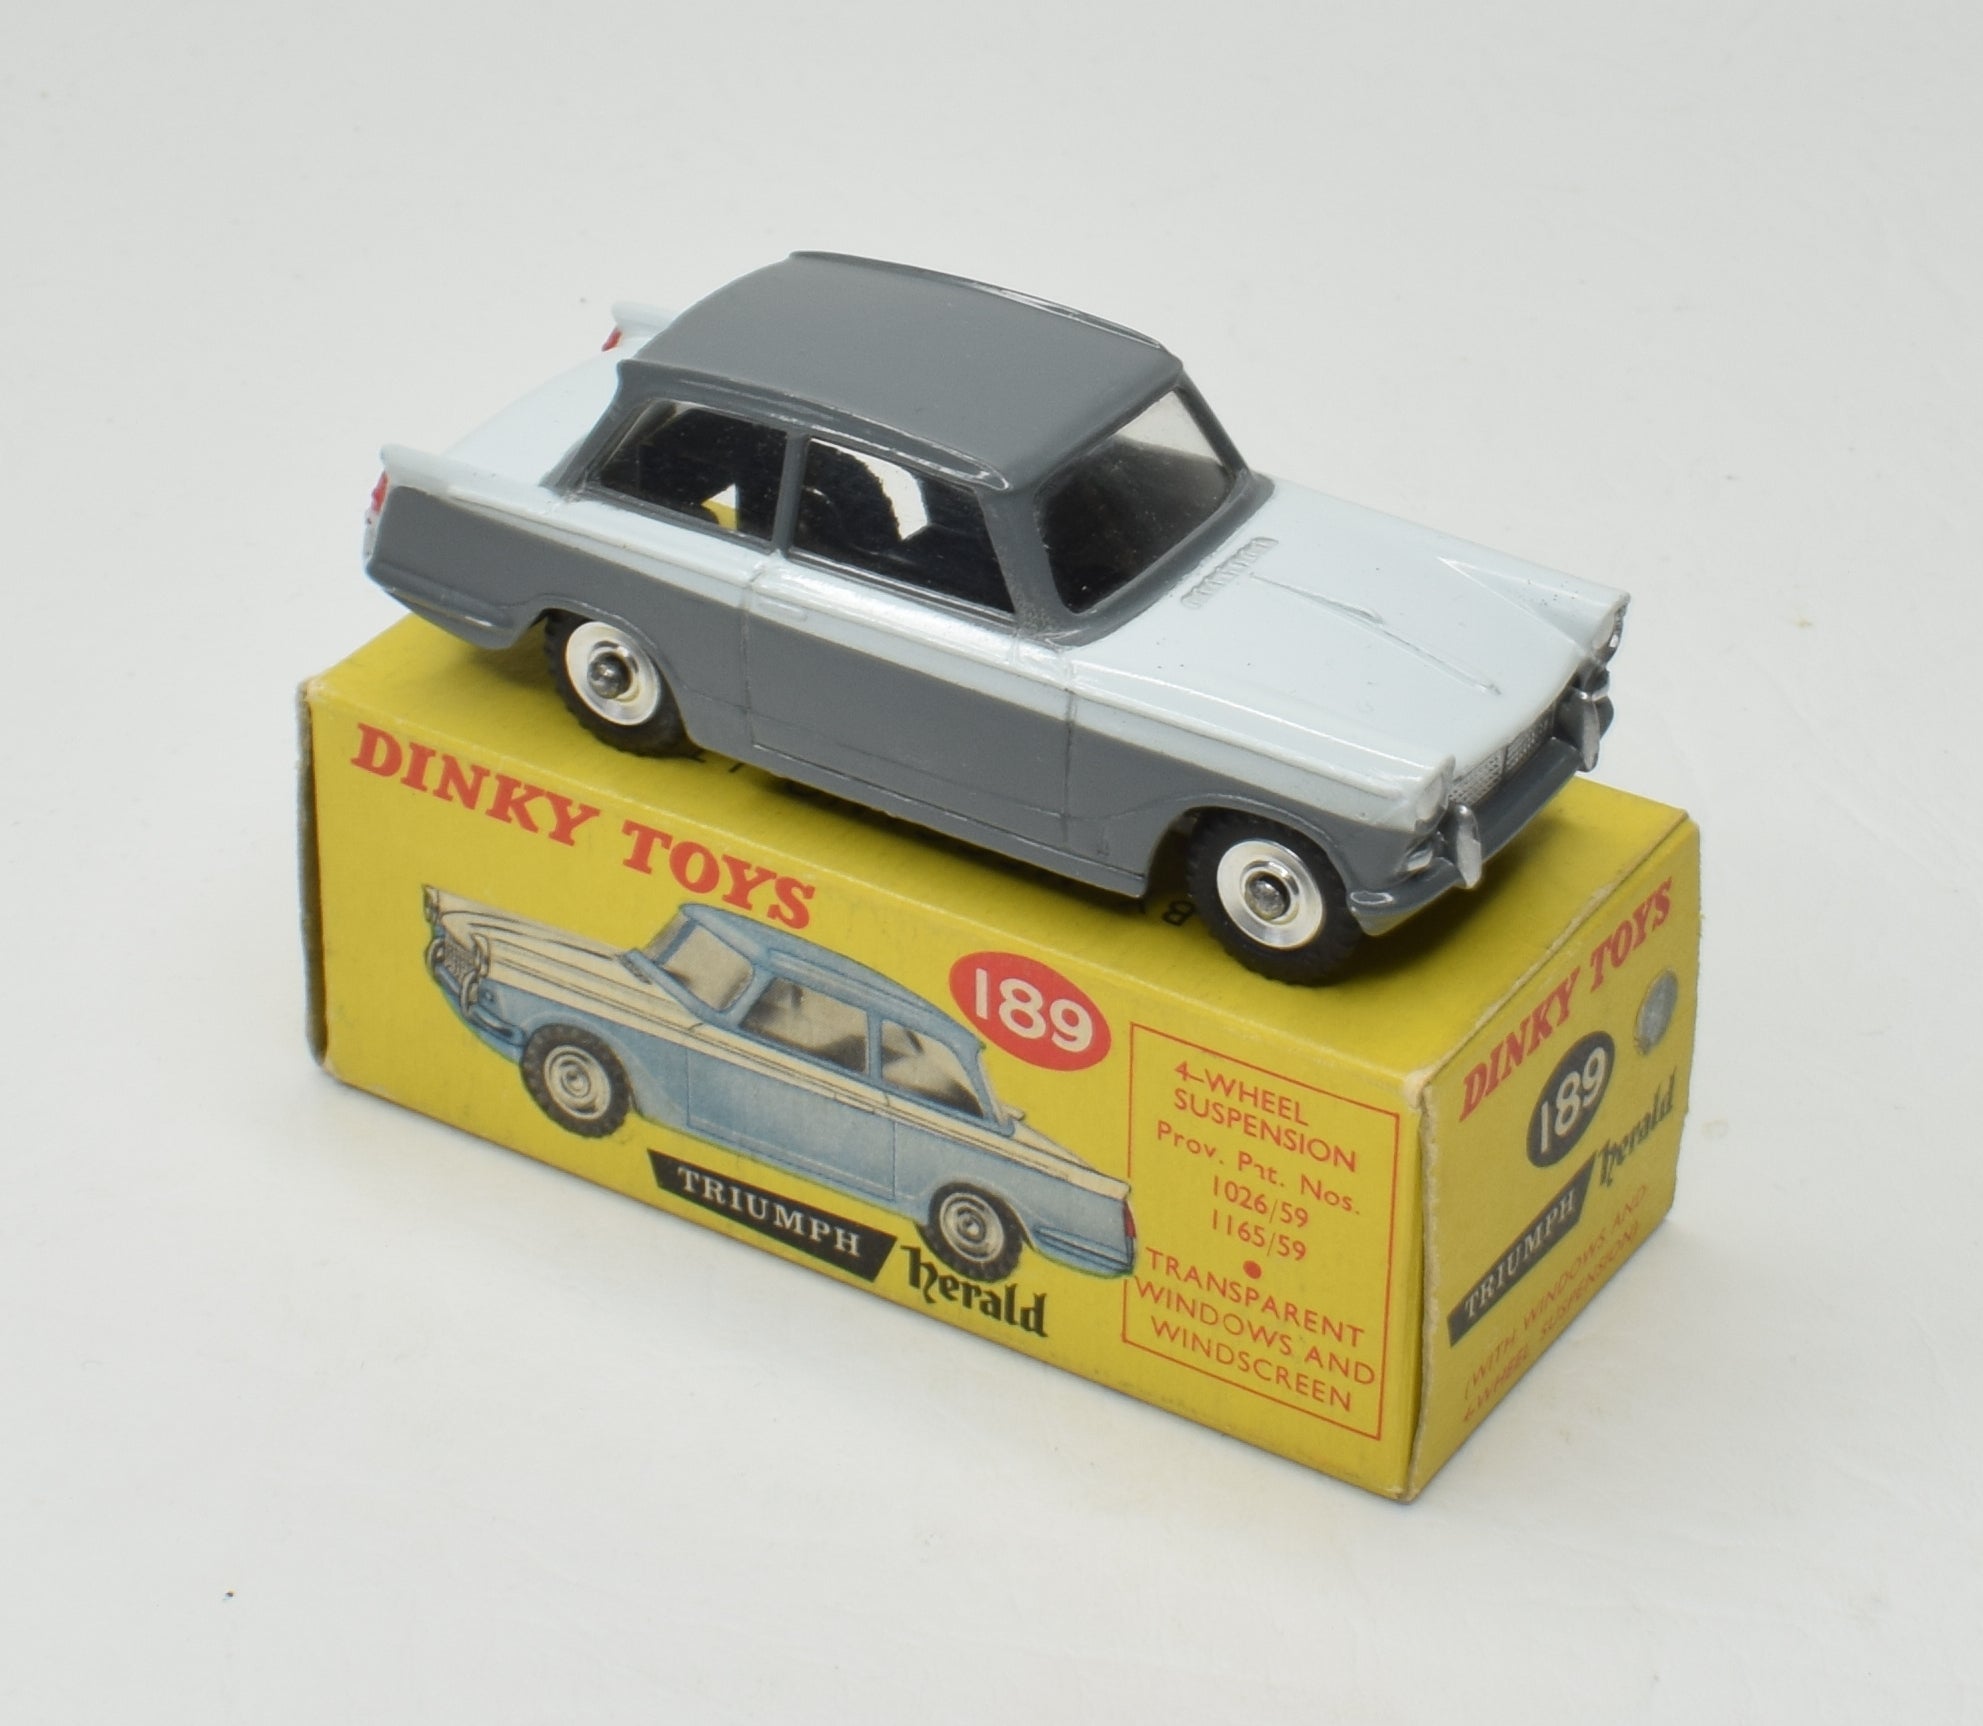 Dinky Toys 189 Triumph Herald 'Promotional' Virtually Mint/Boxed 